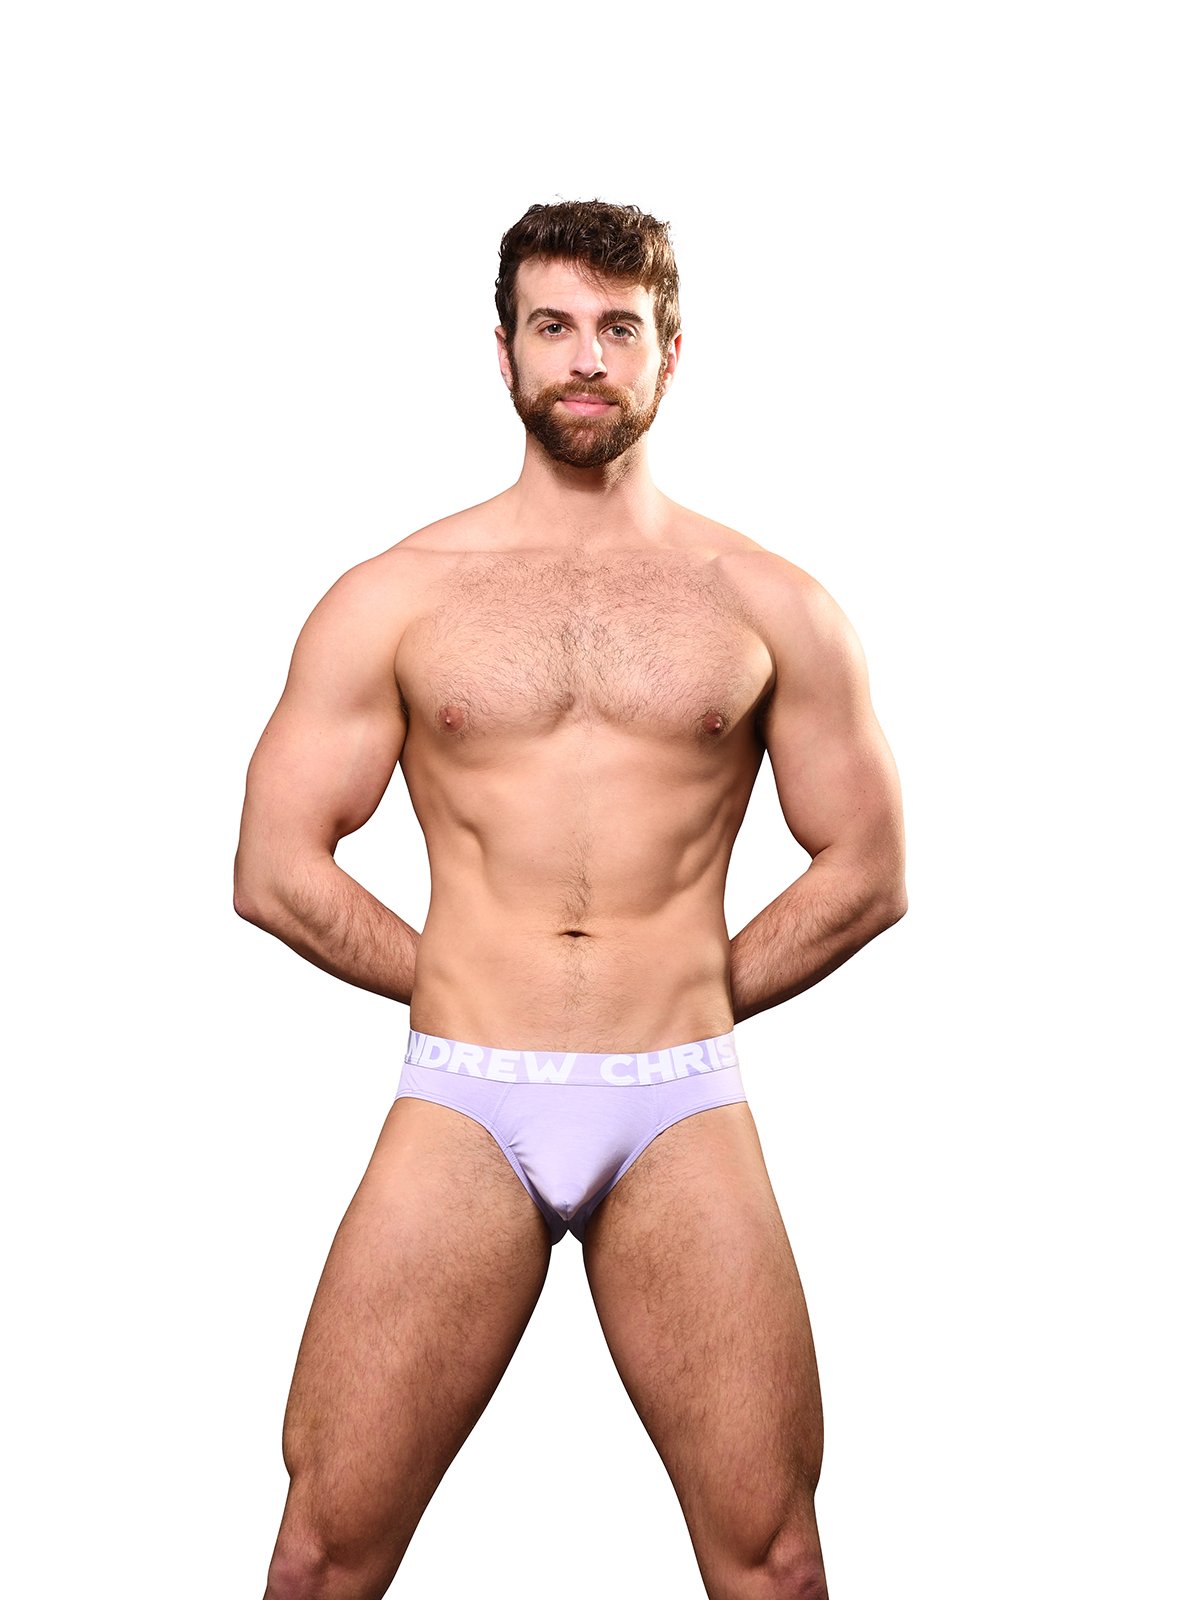 Almost Naked Bamboo Brief | Lavender